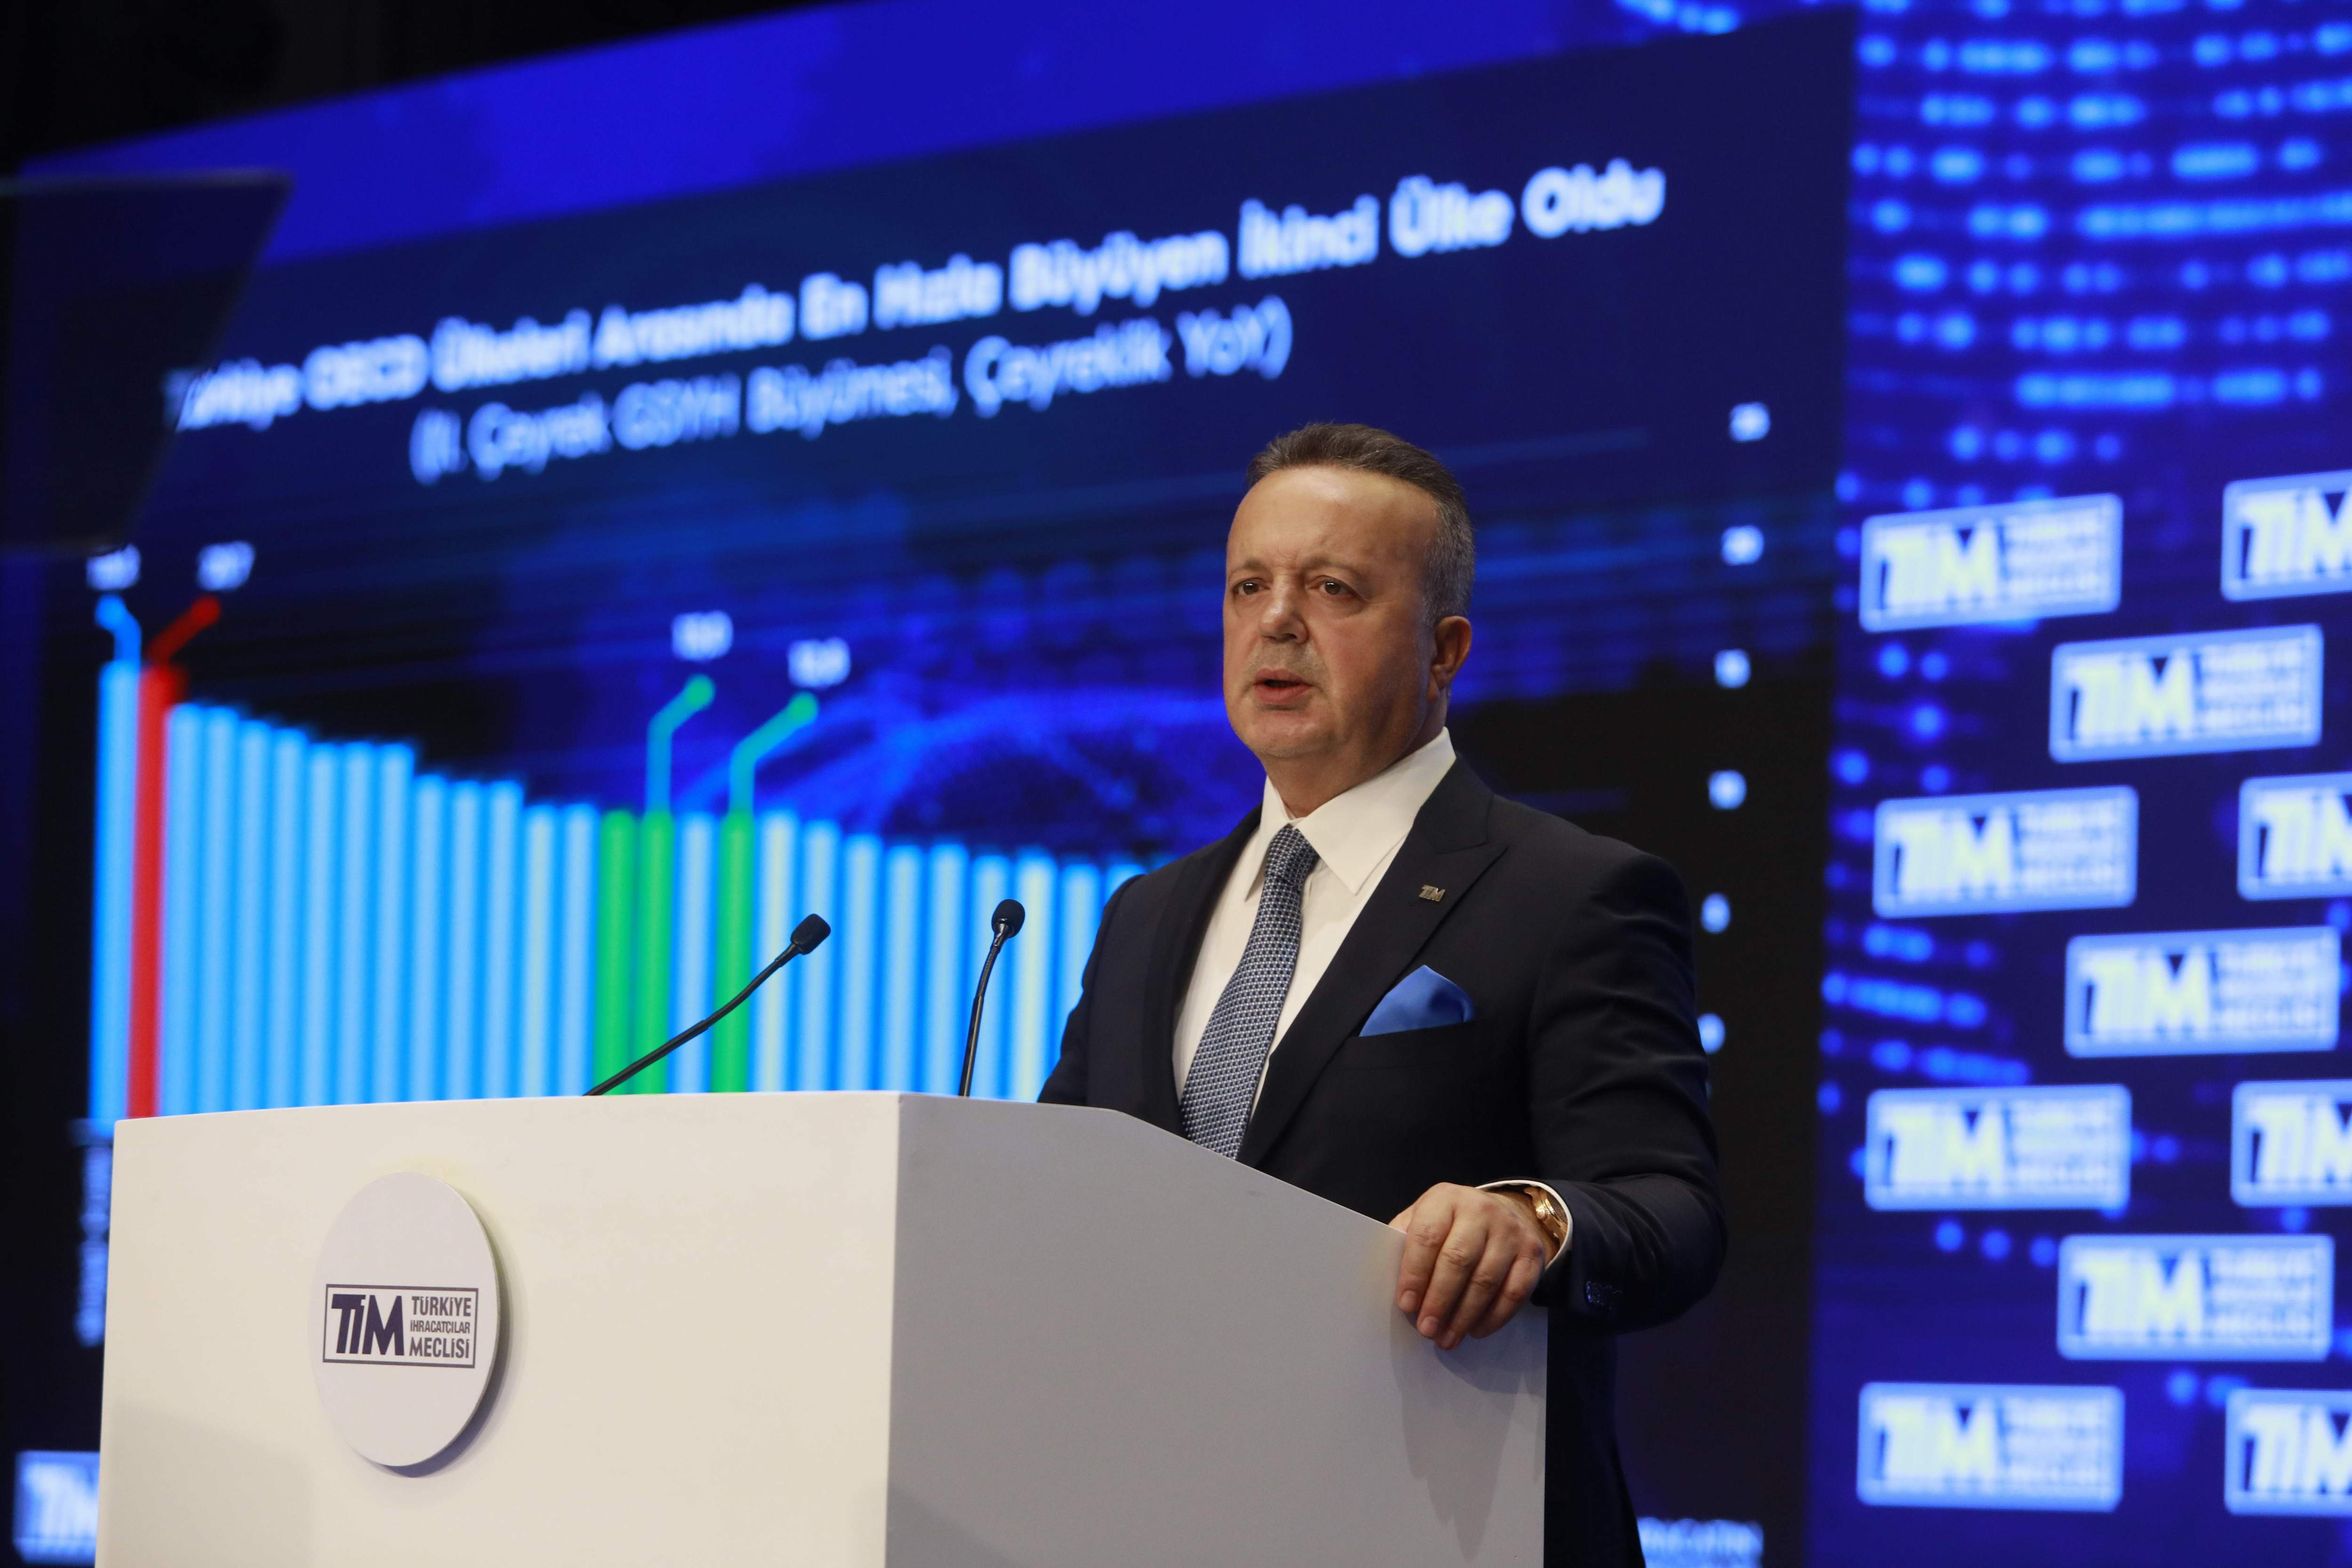 TİM Chairman Gülle Evaluates the Growth Figures